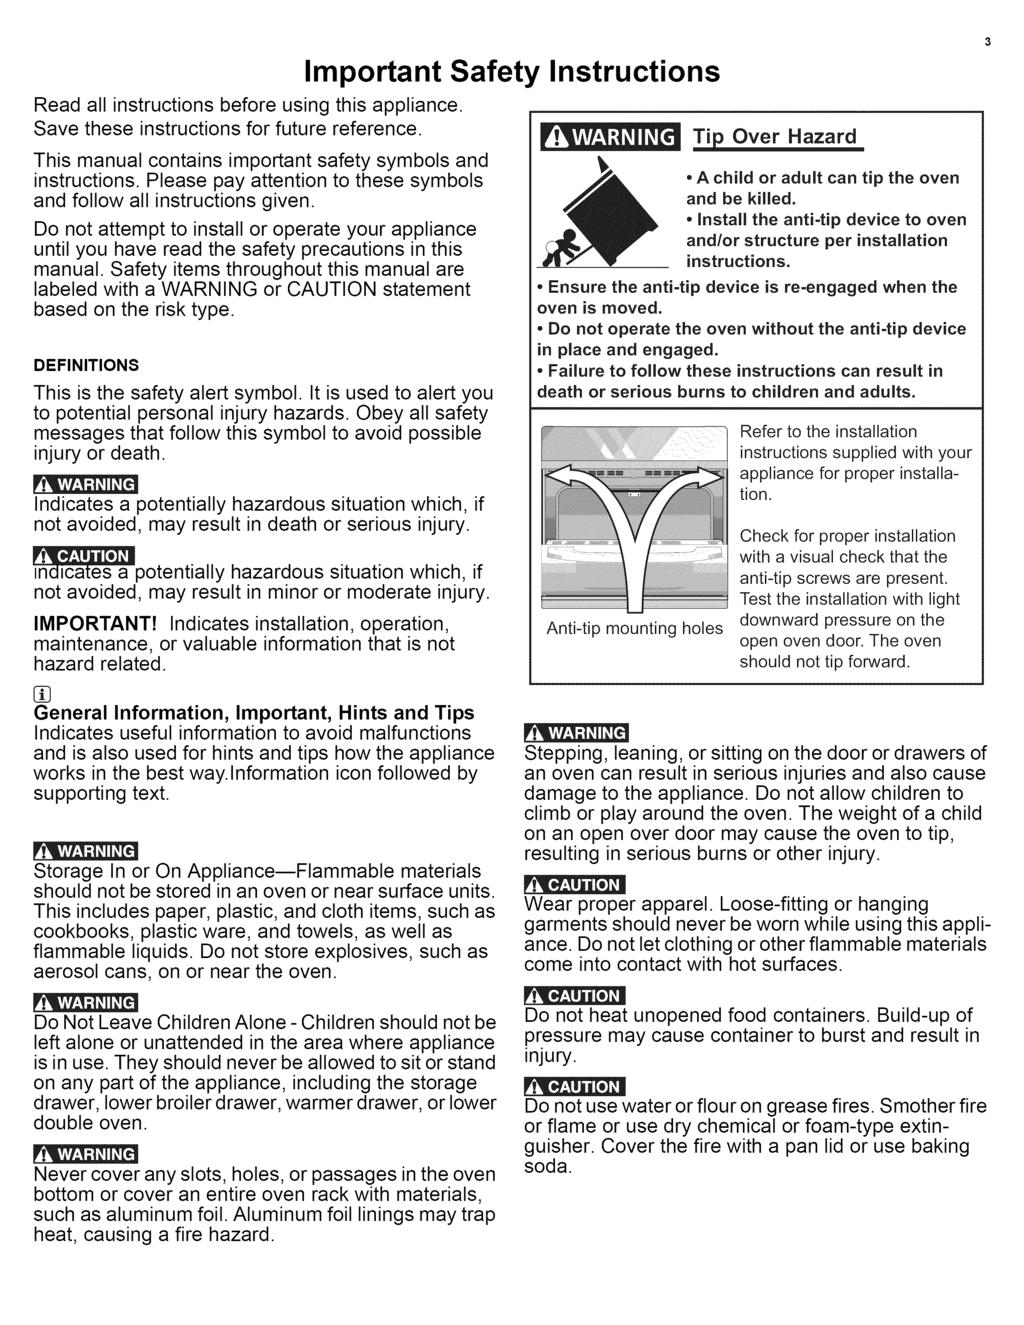 Important Read all instructions before using this appliance. Save these instructions for future reference. This manual contains important safety symbols and instructions.